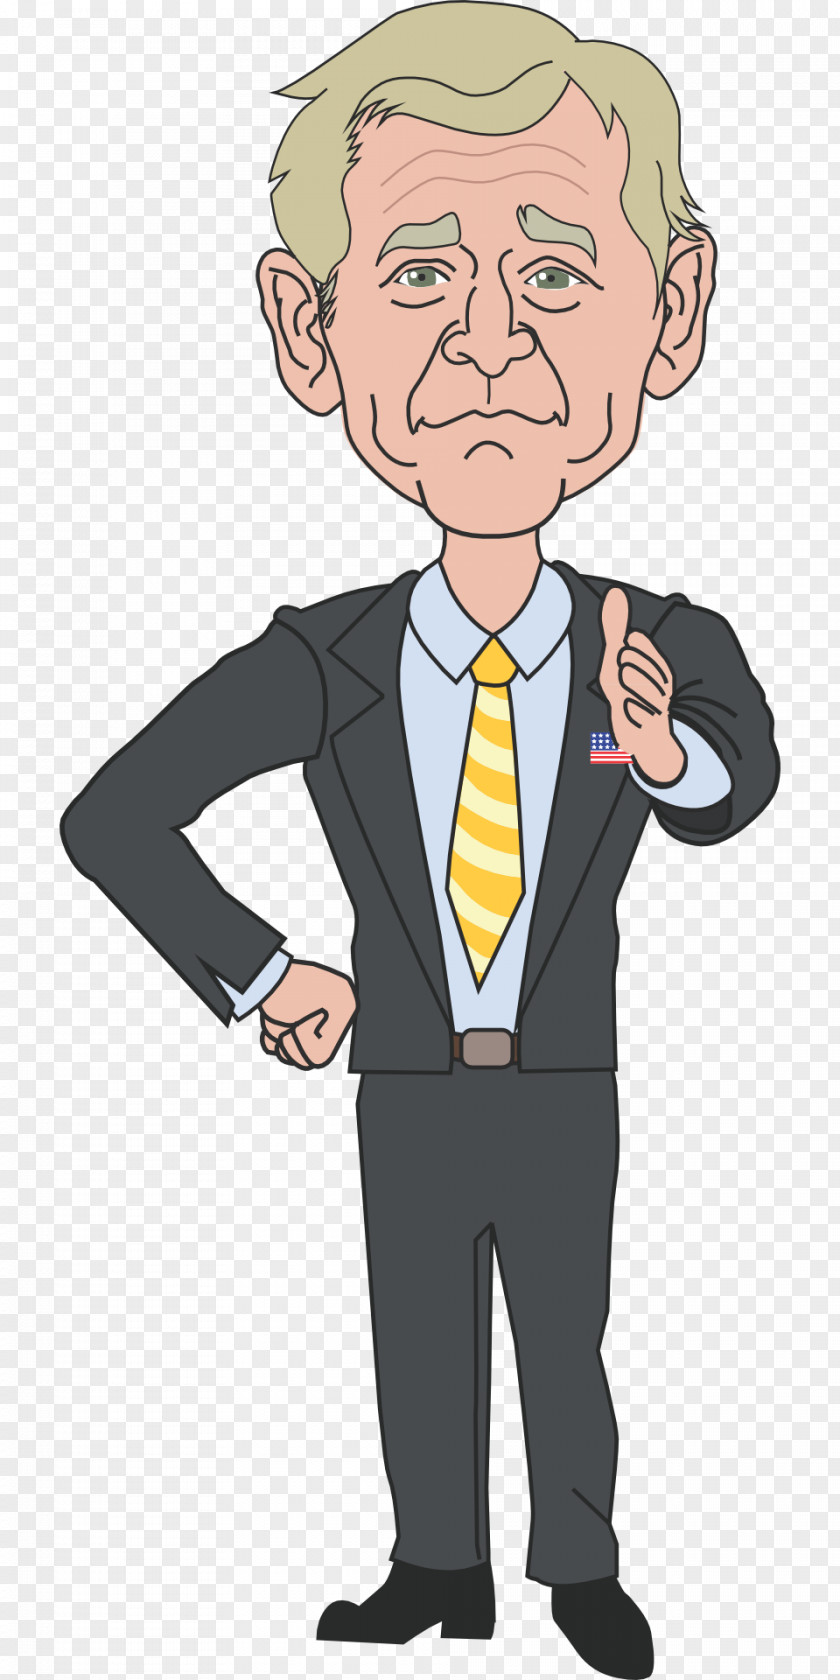 Bush George W. President Of The United States Clip Art PNG